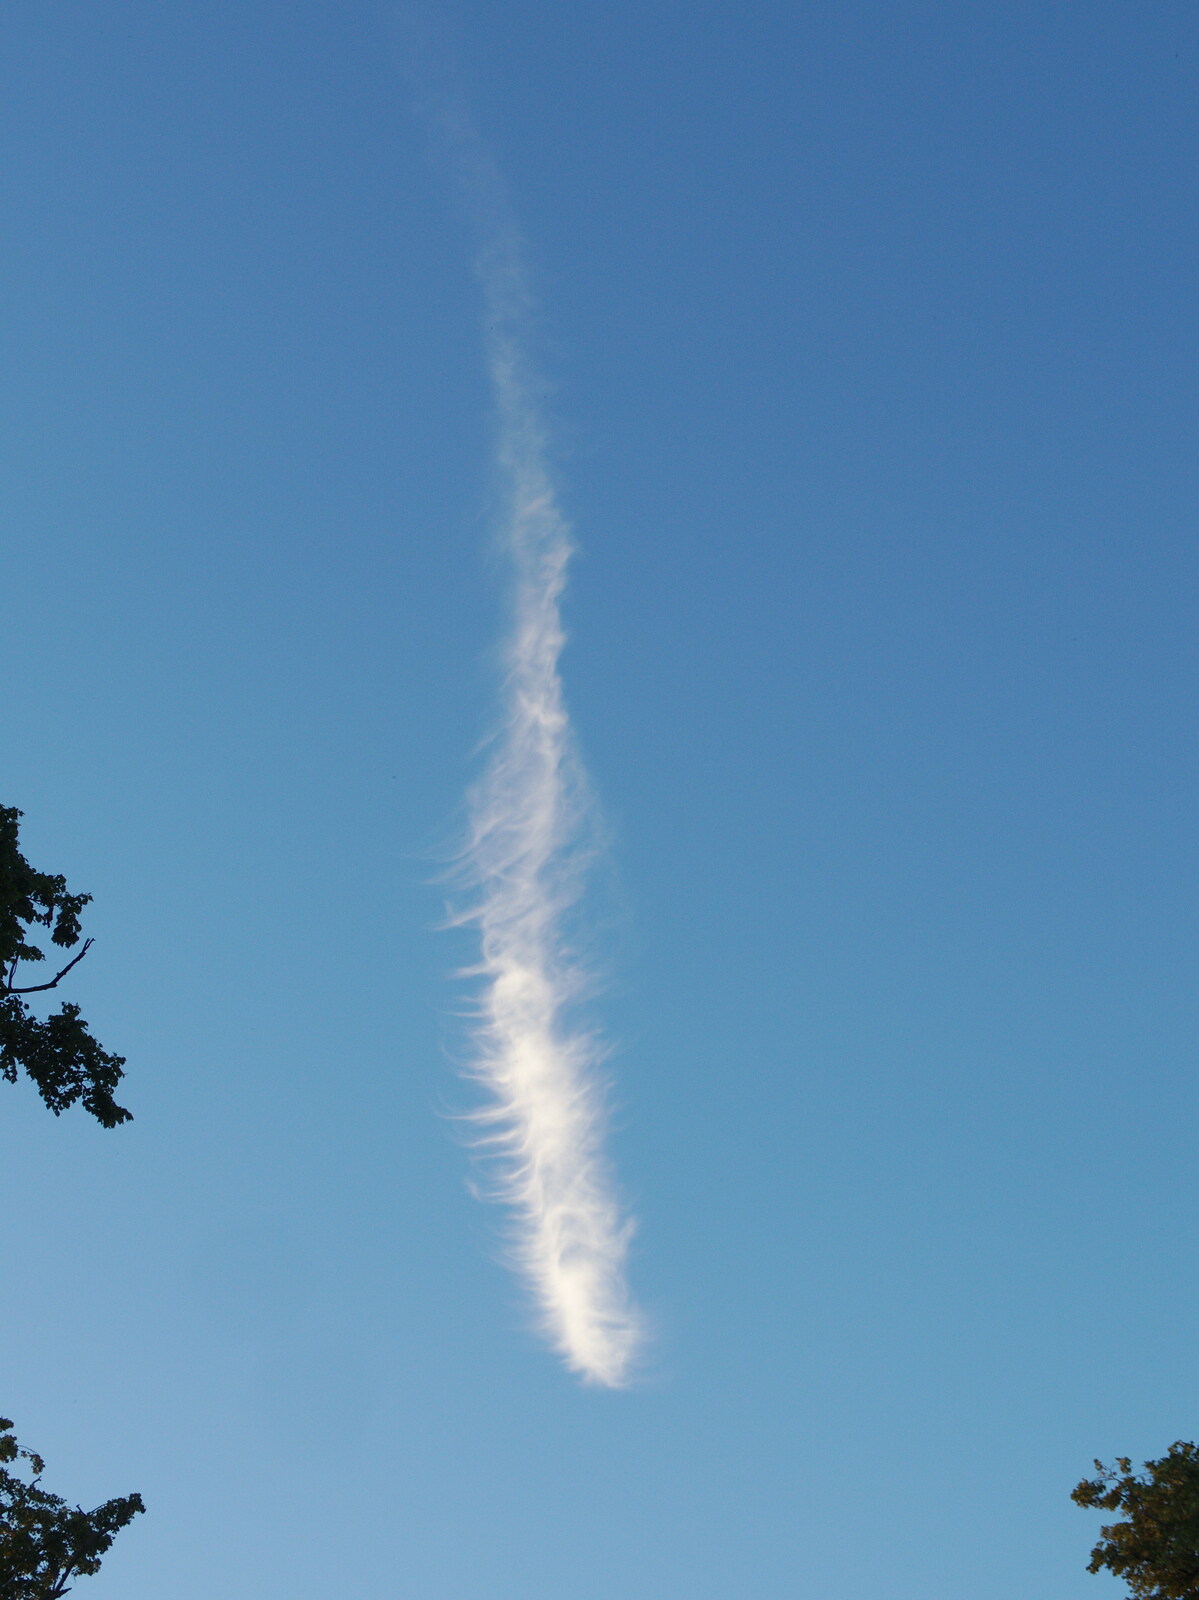 A fluffy contrail in the sky from The BBs at Diss Rugby Club, Bellrope Lane, Roydon, Norfolk - 7th June 2014